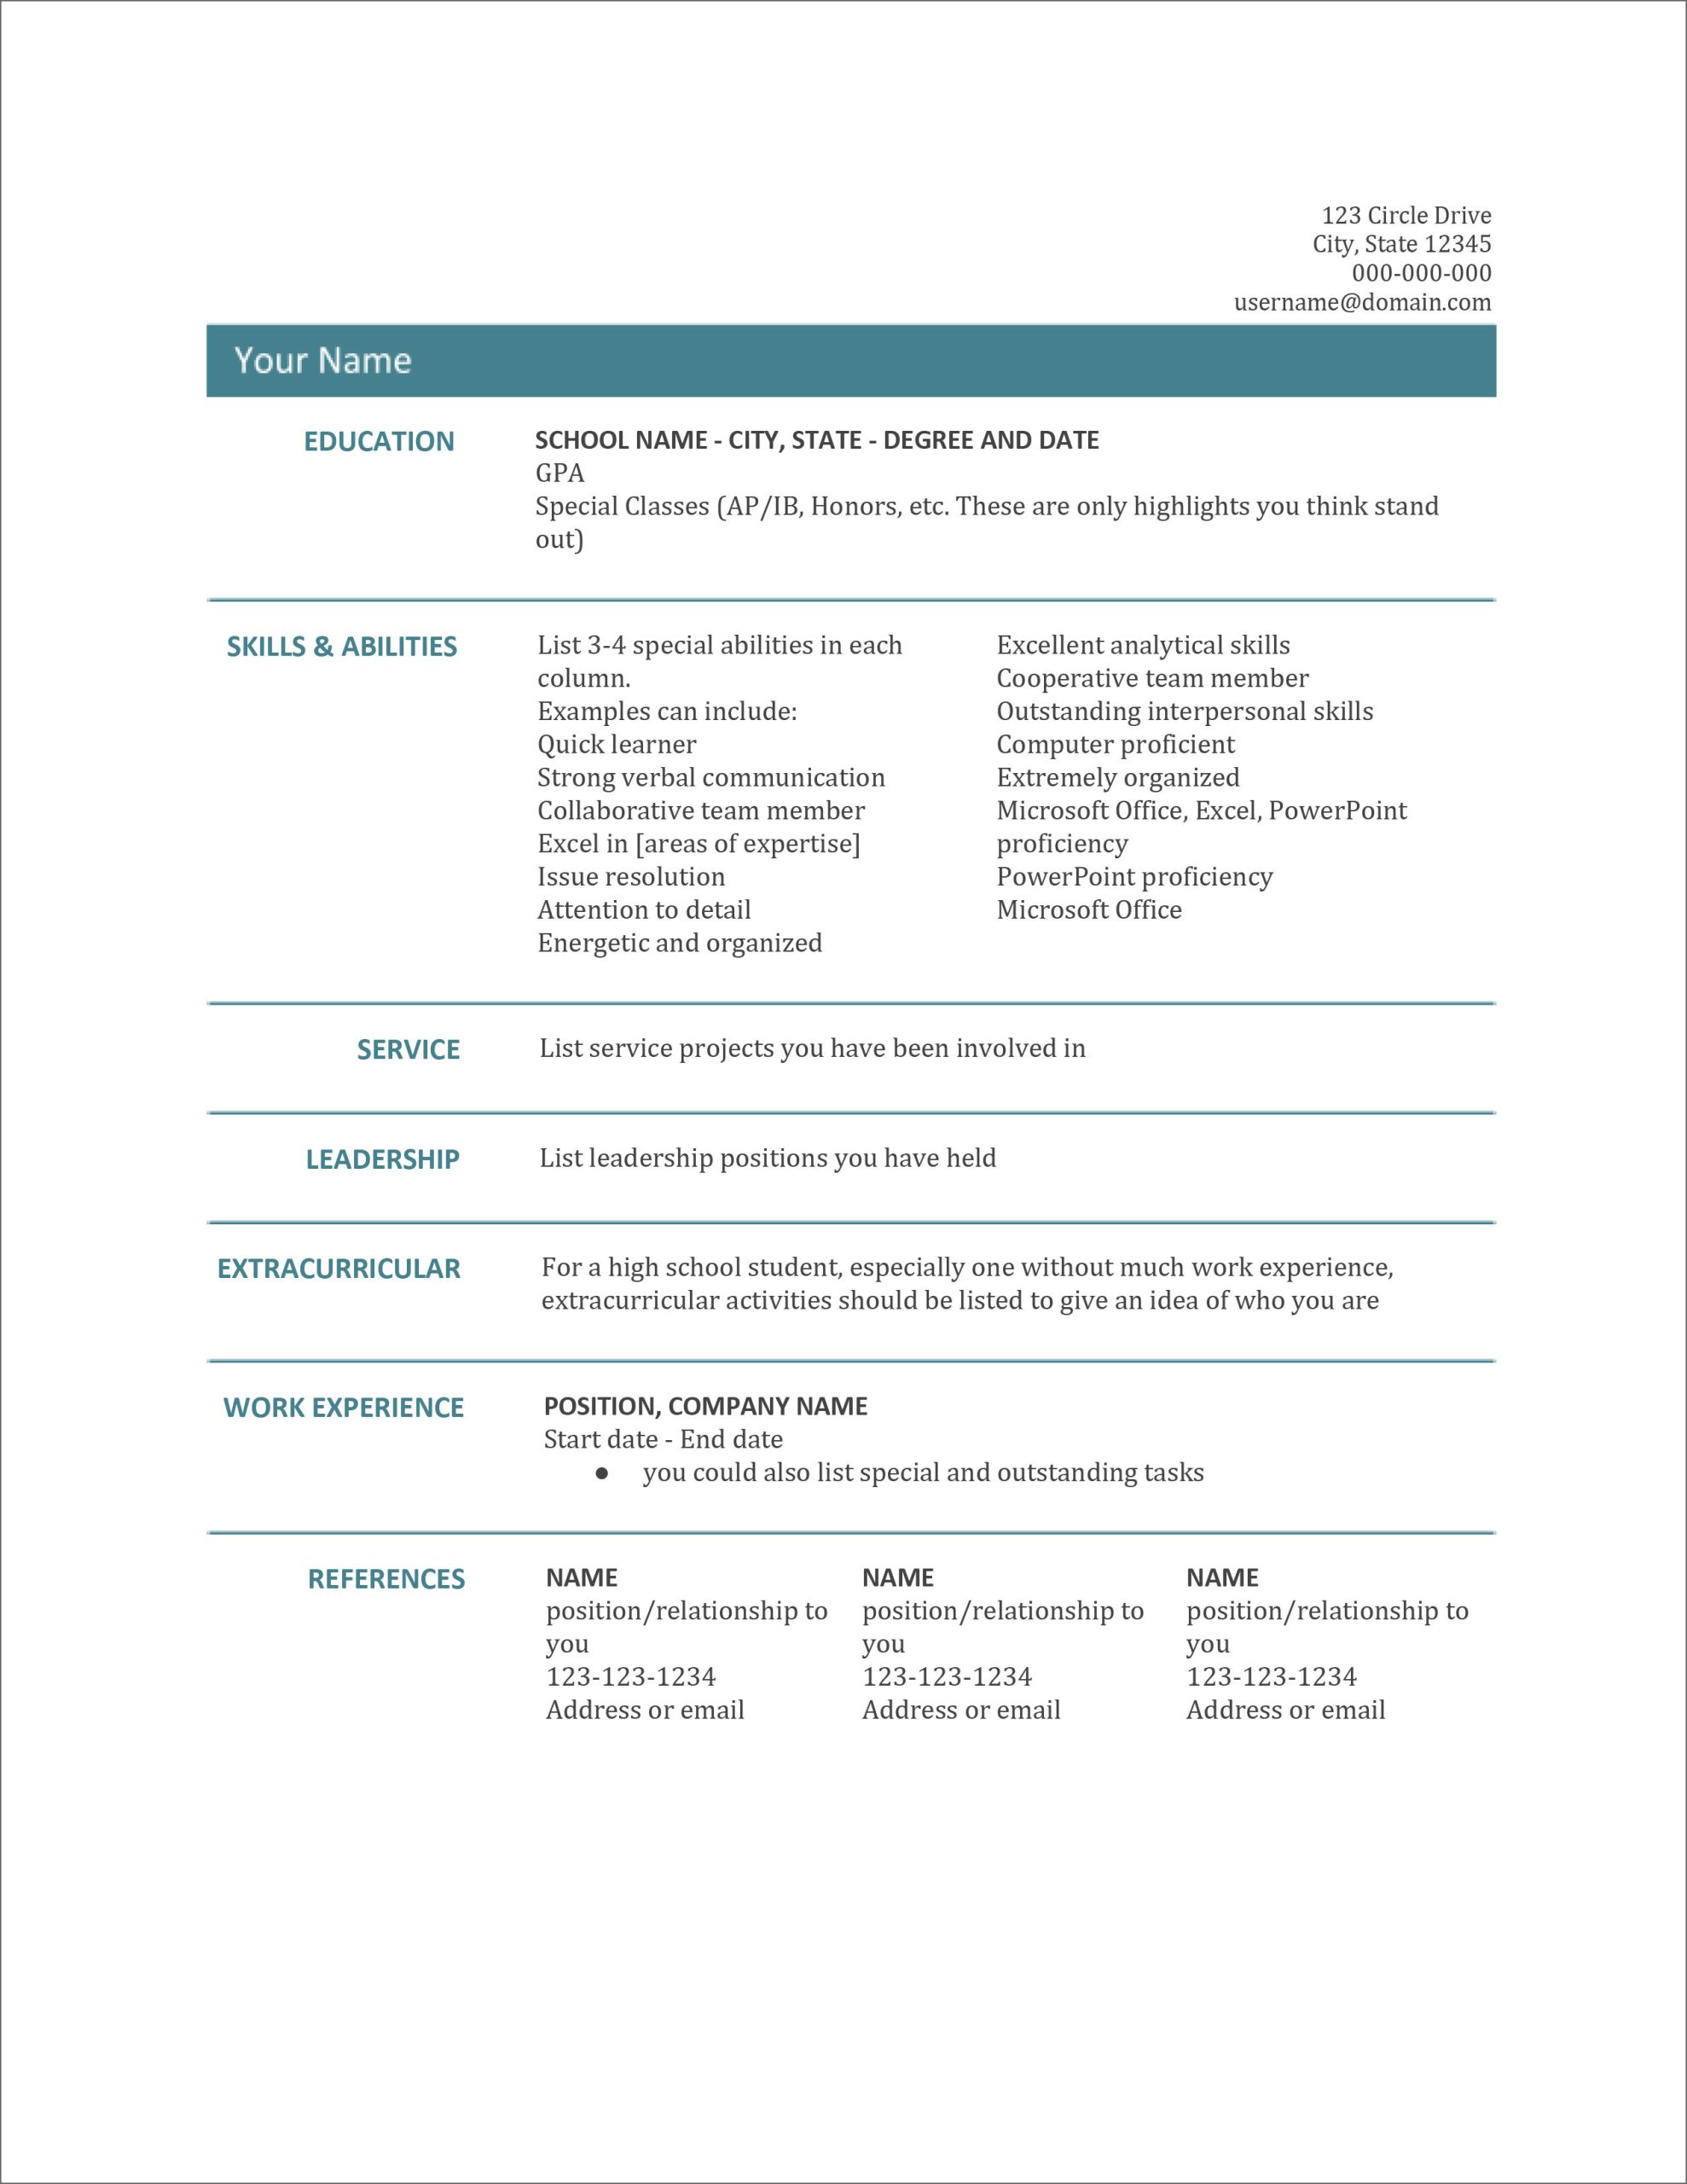 Sample Resume with Microsoft Office Experience 45 Free Modern Resume / Cv Templates – Minimalist, Simple & Clean …